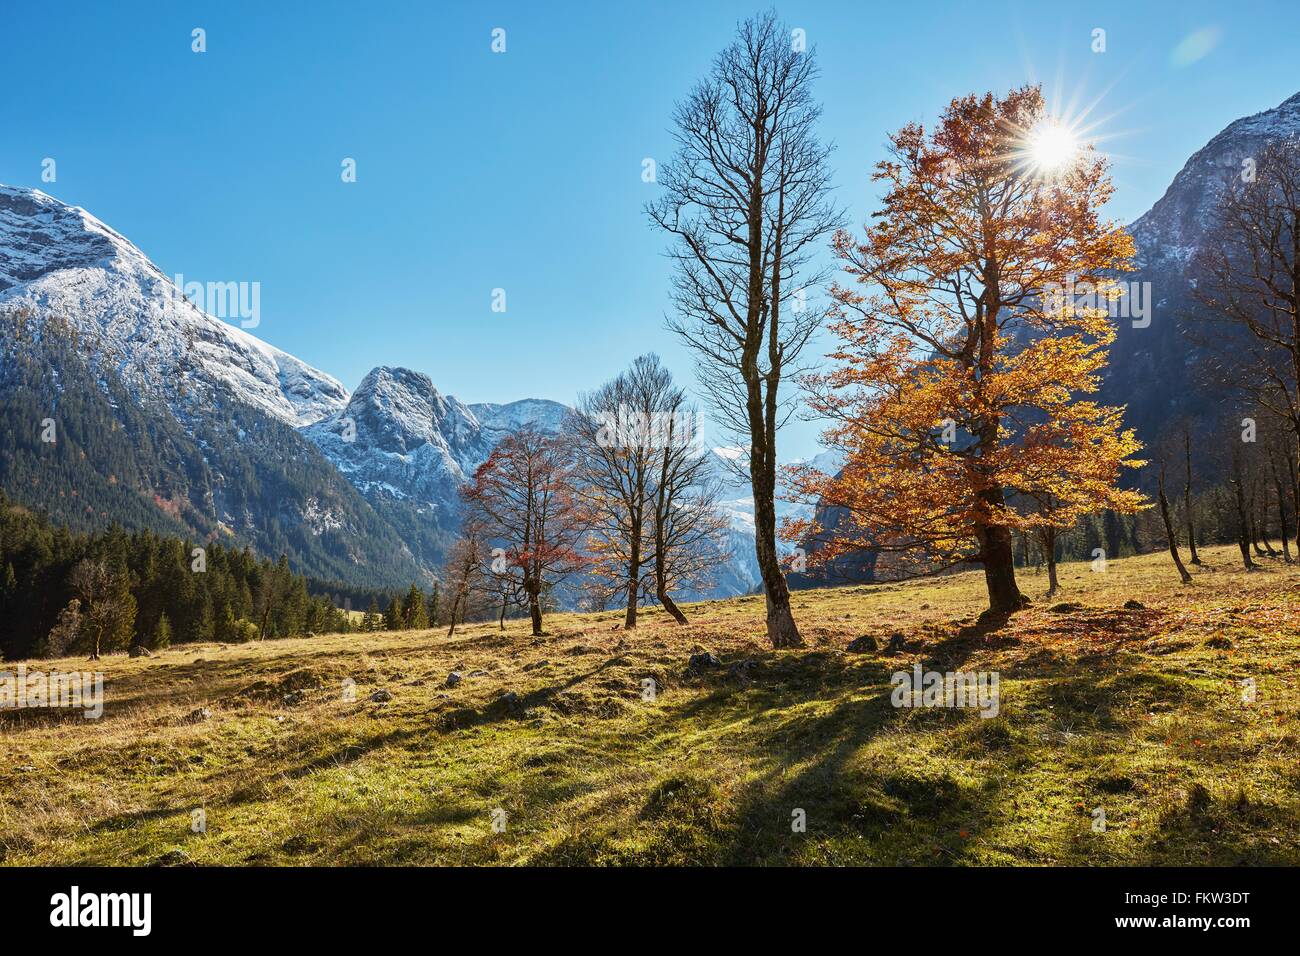 Sunlit landscape with distant snow capped mountains, Hinterriss, Tyrol, Austria Stock Photo